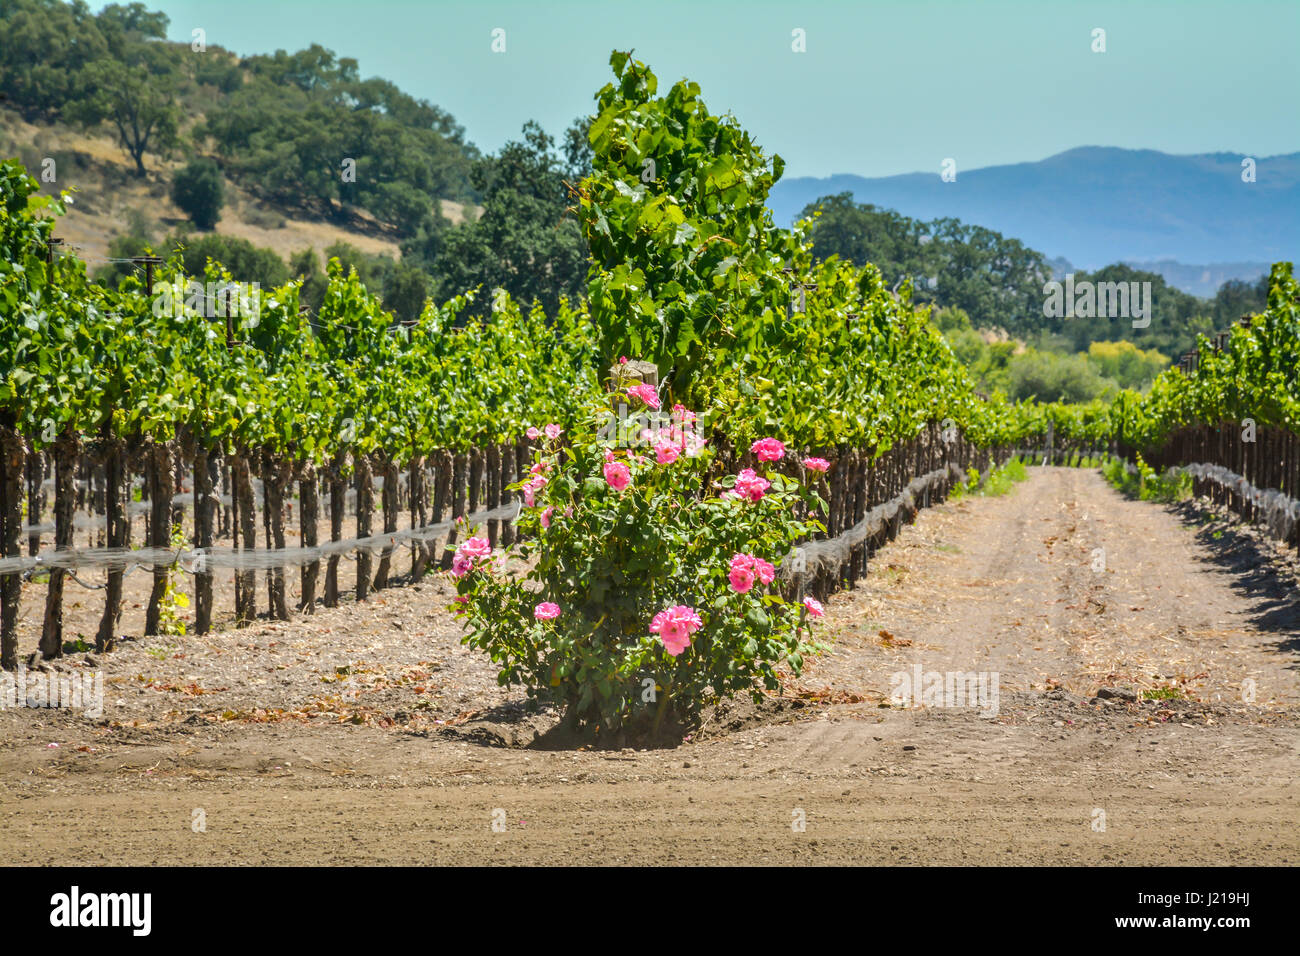 Trellises of grapevines trail along the rows of a vineyard amongst the rolling hills and mountains of the Santa Ynez Valley wine country in California Stock Photo